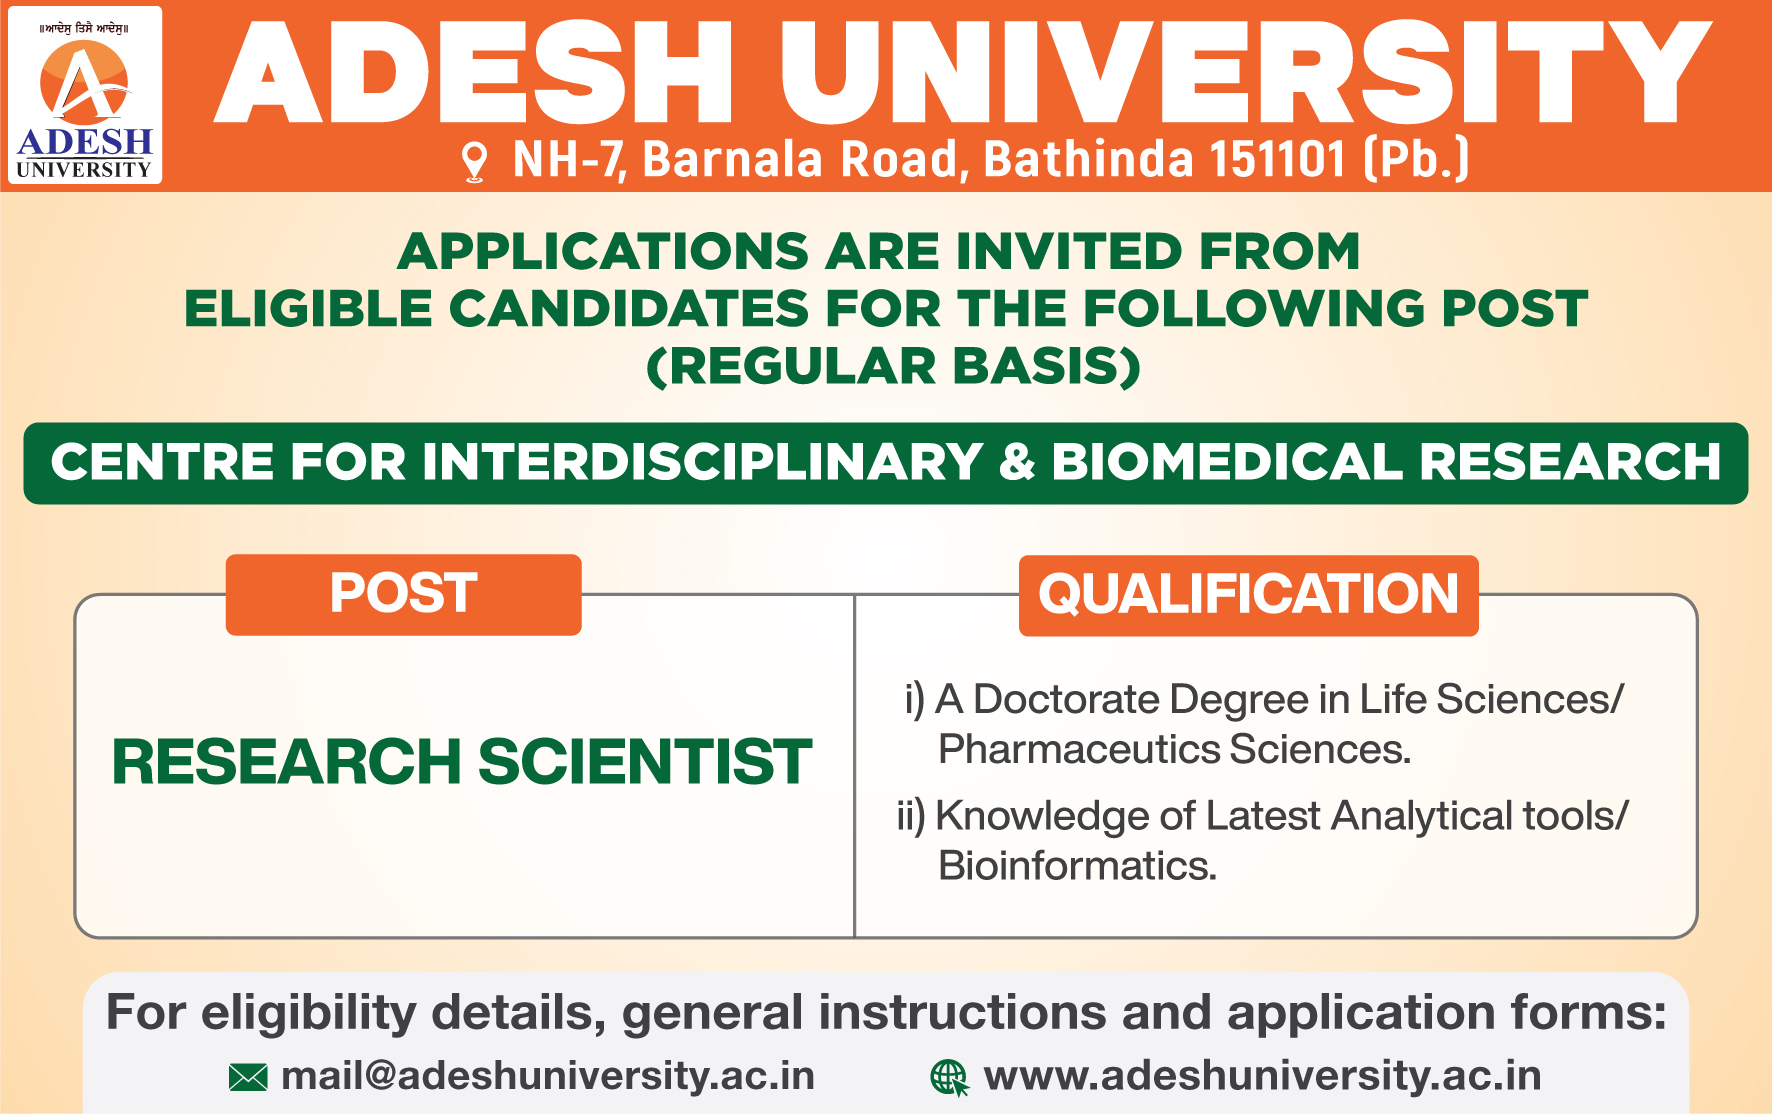 Applications are invited for the post of Research Scientist